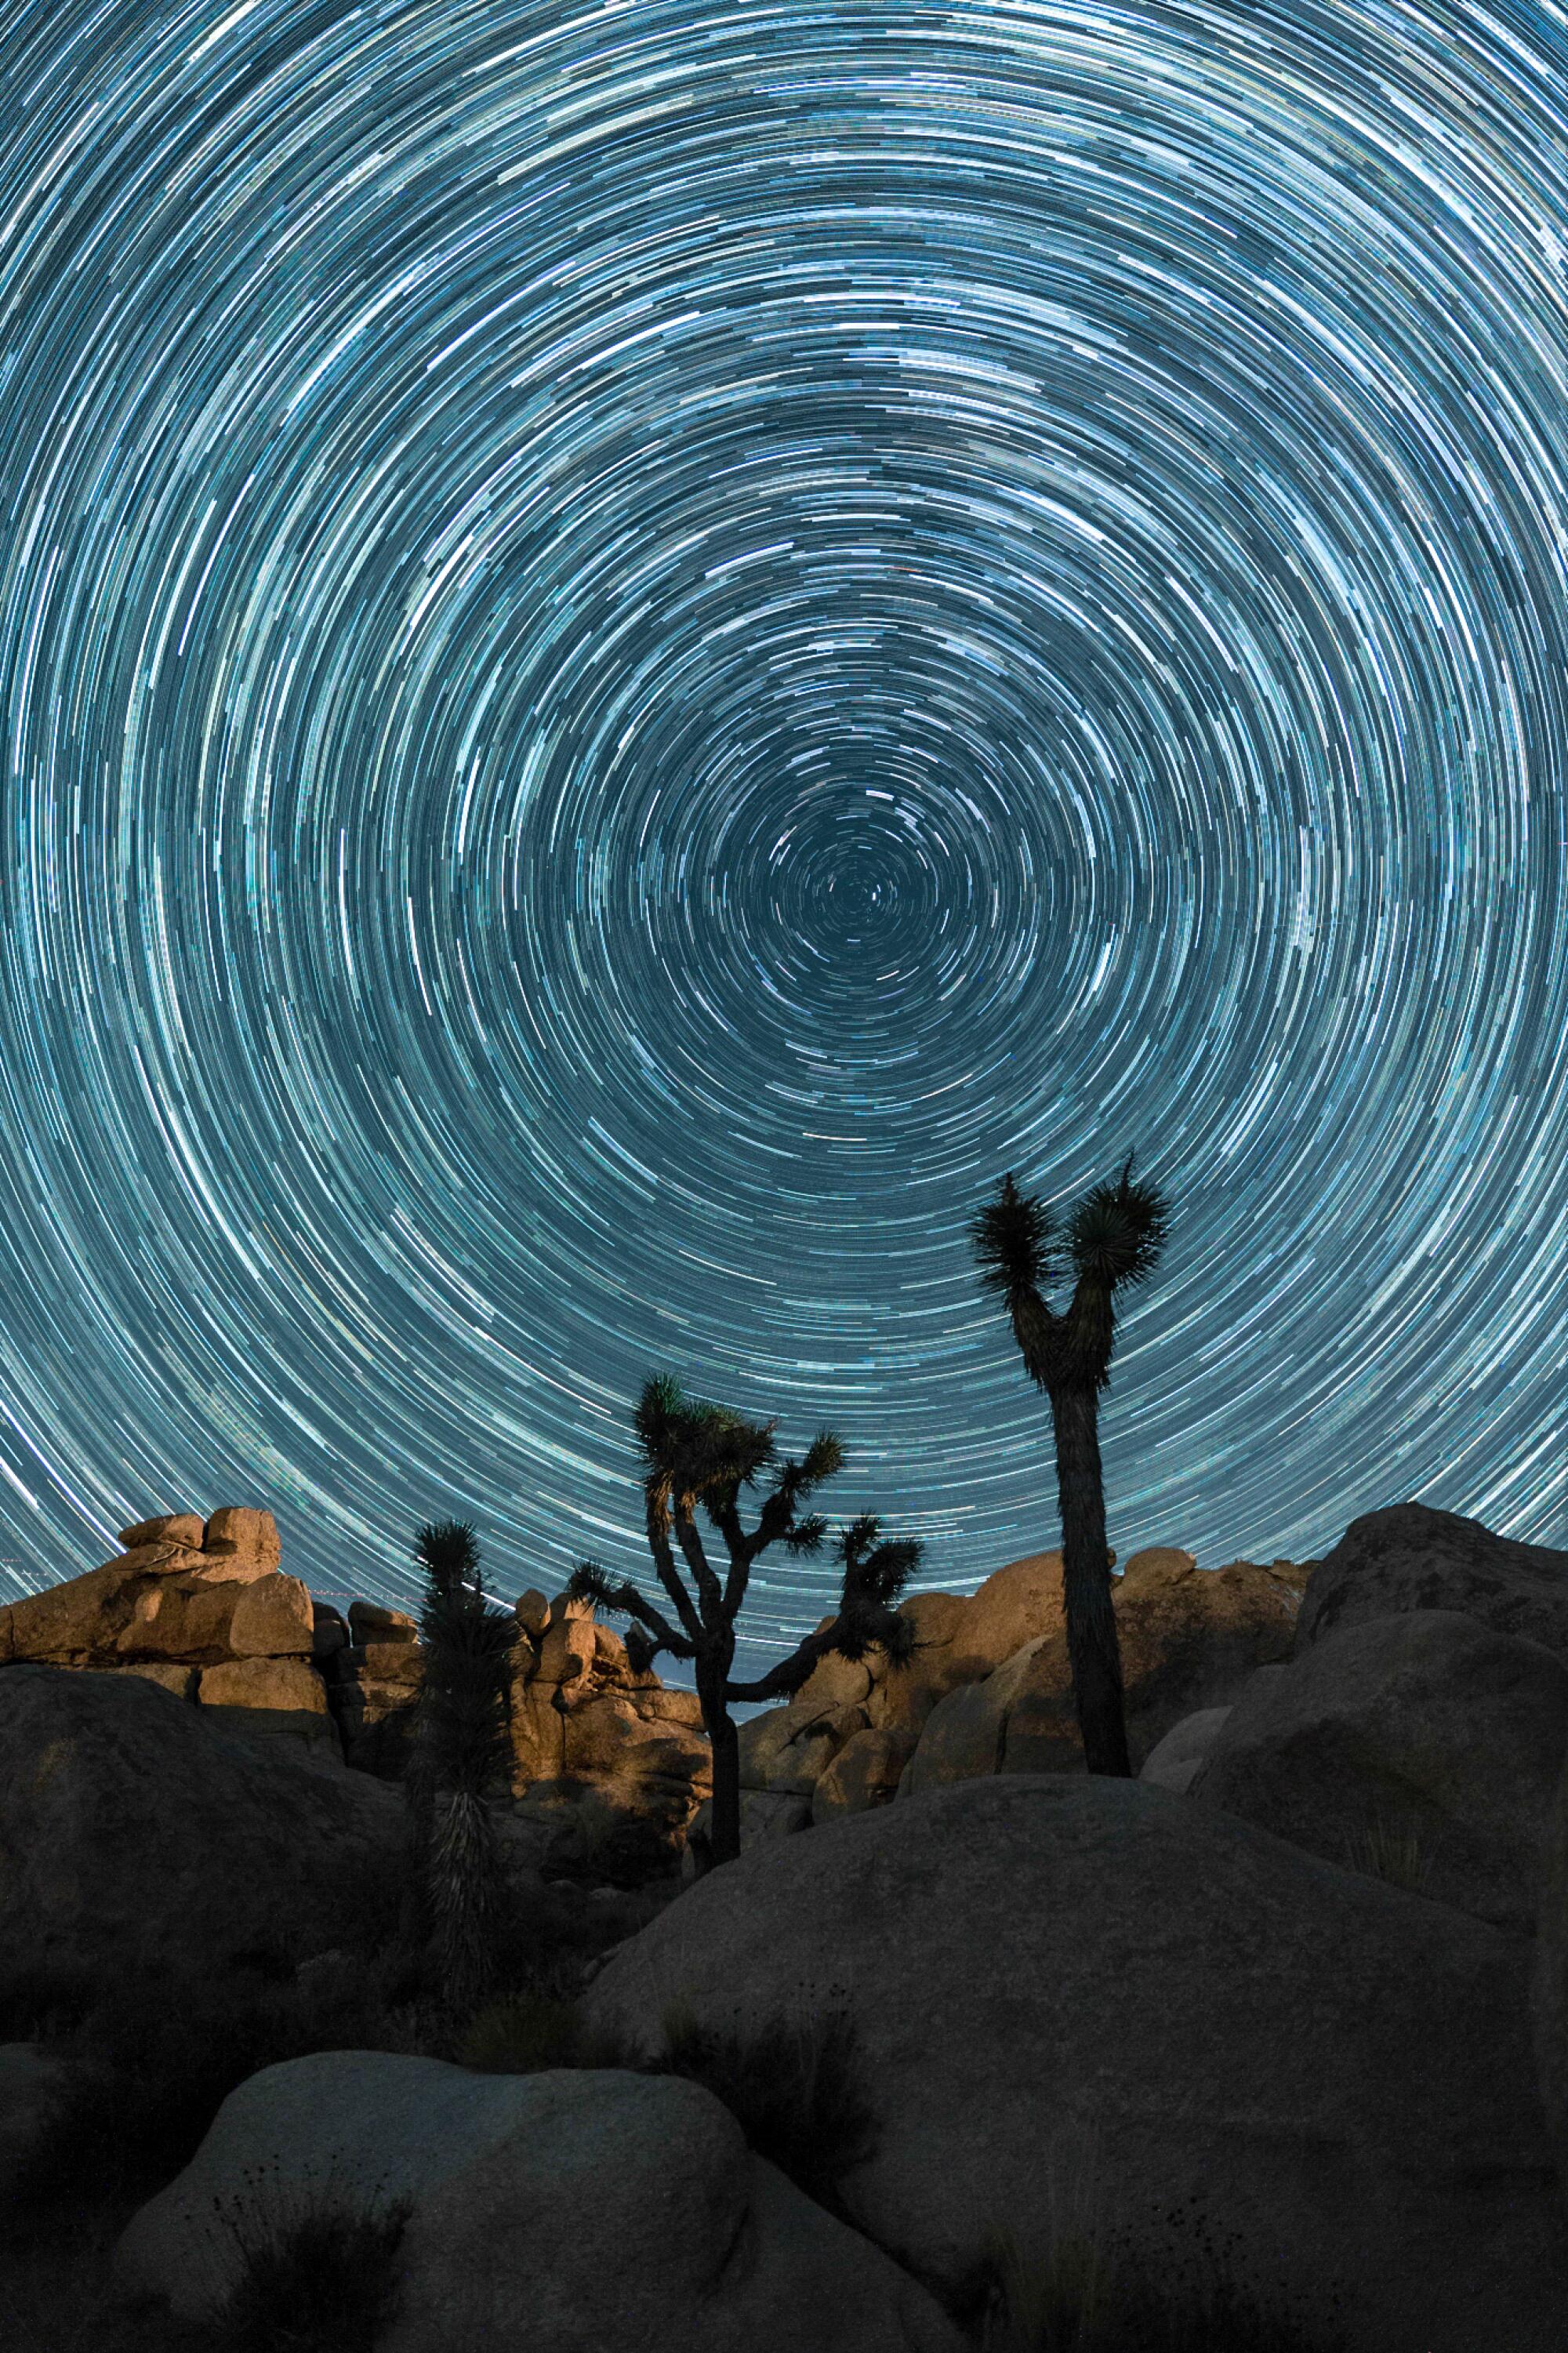 A composite of star photos, made with the software Starry Sky Stacker.